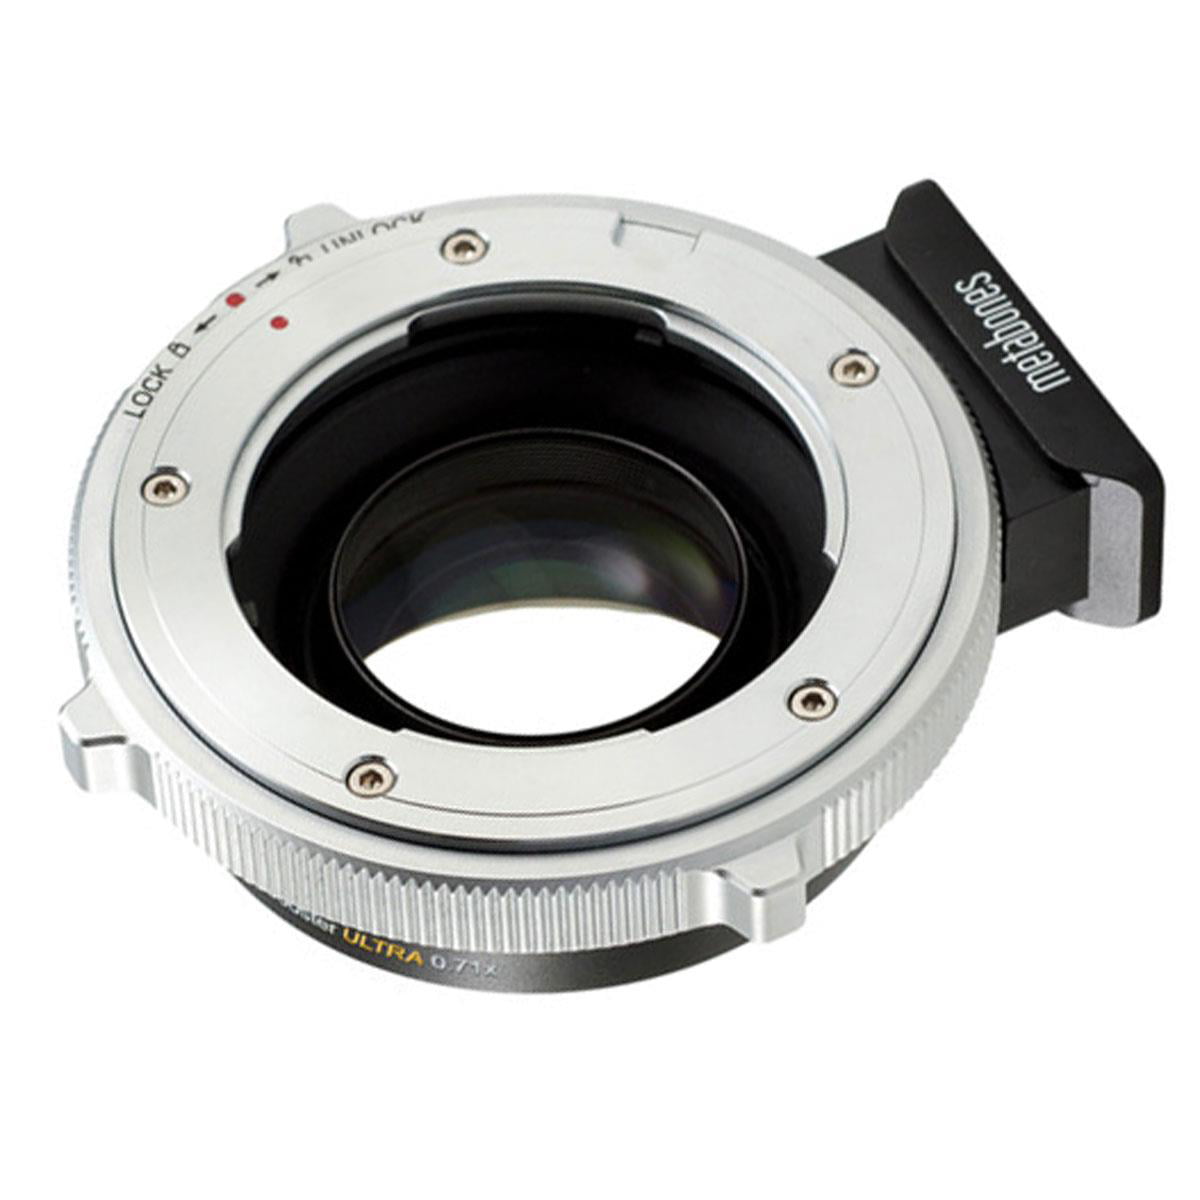 Metabones Contax Yashica CY Lens to Fuji X-Mount Camera Speed Booster ULTRA  0.71x CINE Adapter